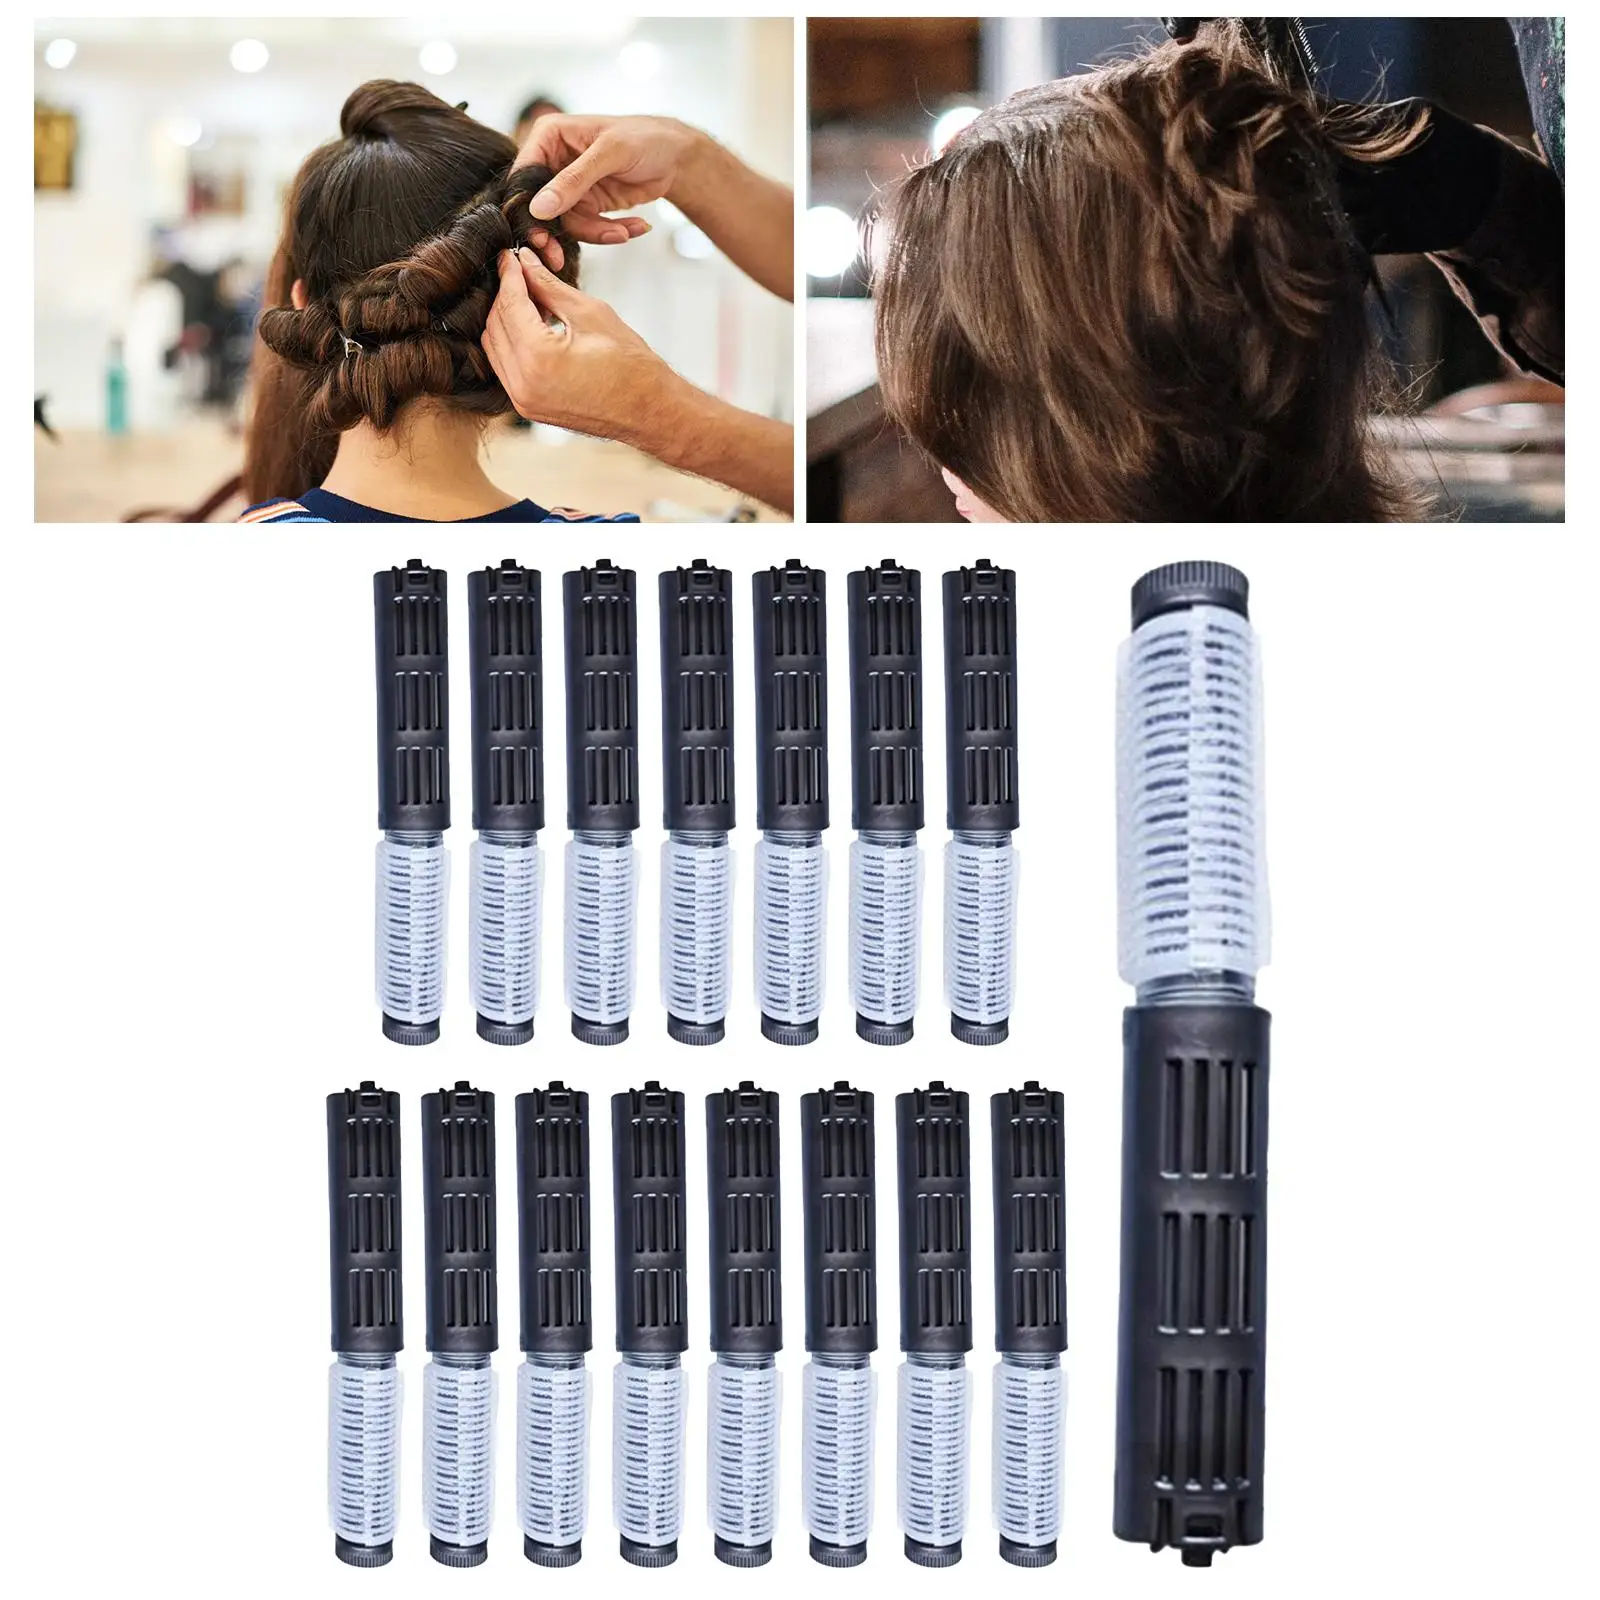 Hair Cold Wave Rods DIY Accessories Durable No Heat Morgan Perm Curler Clips for Salon Barber Home Long Short Hair Women Girls